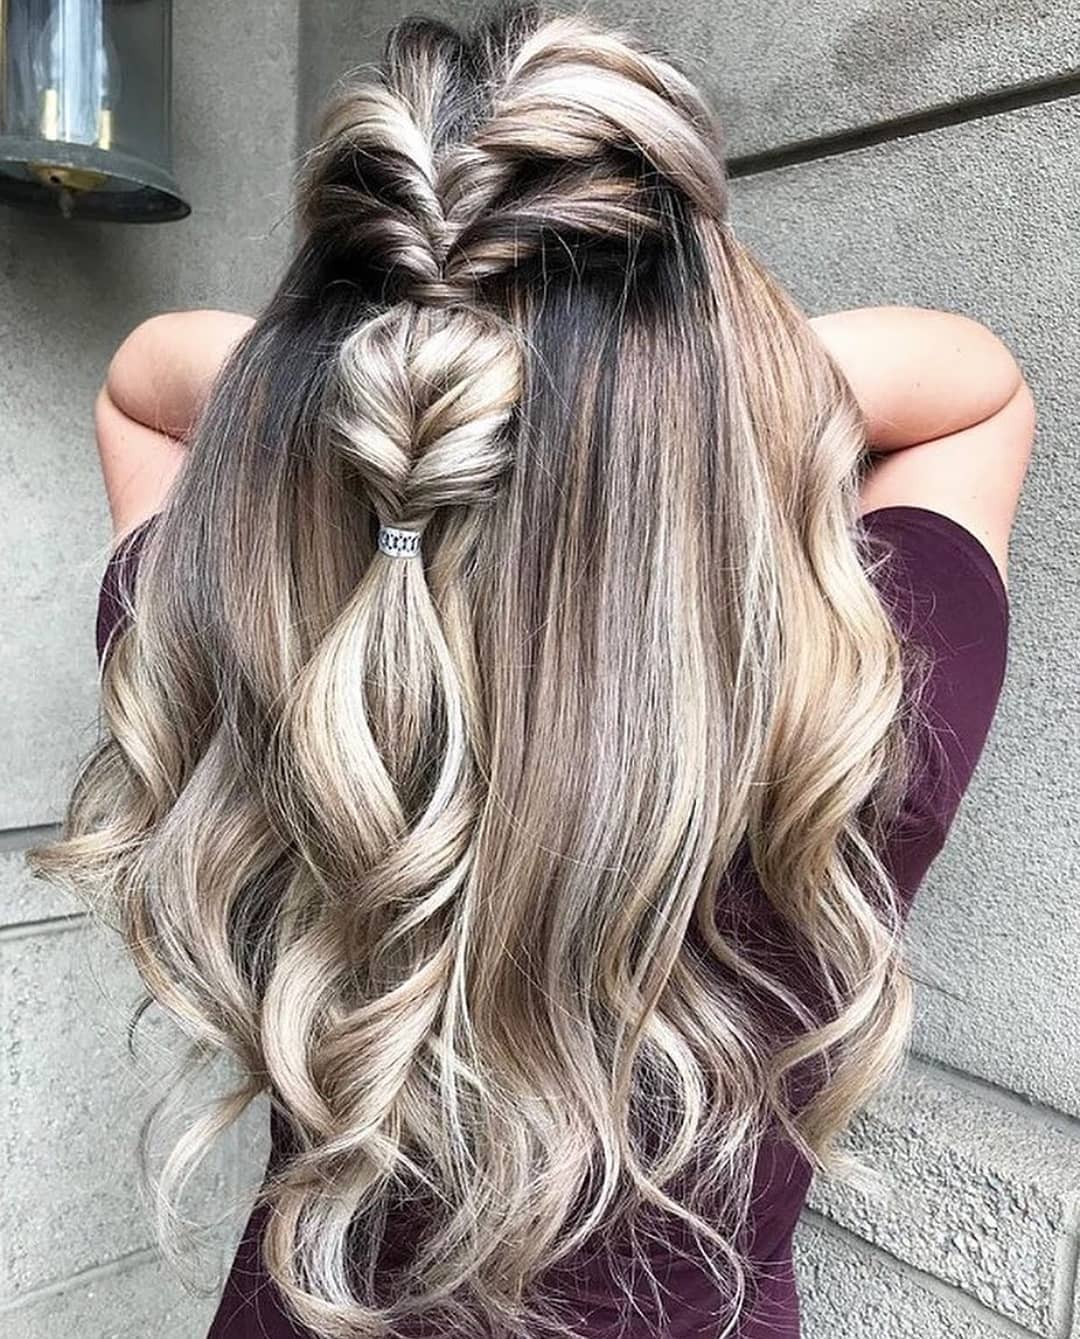 10 Amazing Braided Hairstyles for Long Hair 2021